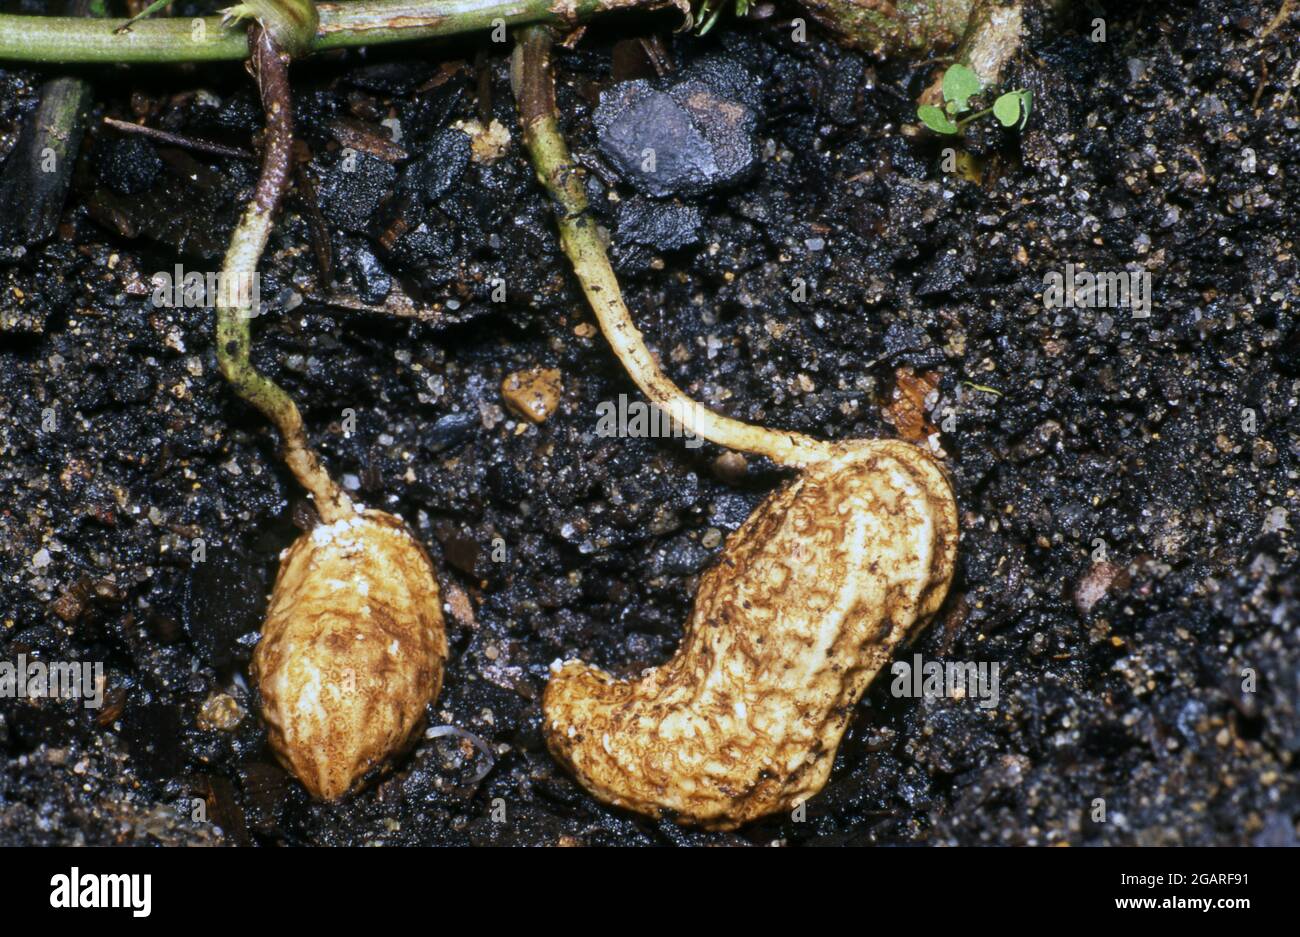 PEANUT 'VIRGINIA (ARACHIS HYPOGAEA) PODS IN SOIL. FABACEAE. ALSO KNOWN AS MONKEY NUTS, GROUNDNUTS OR GOOBERS. Stock Photo